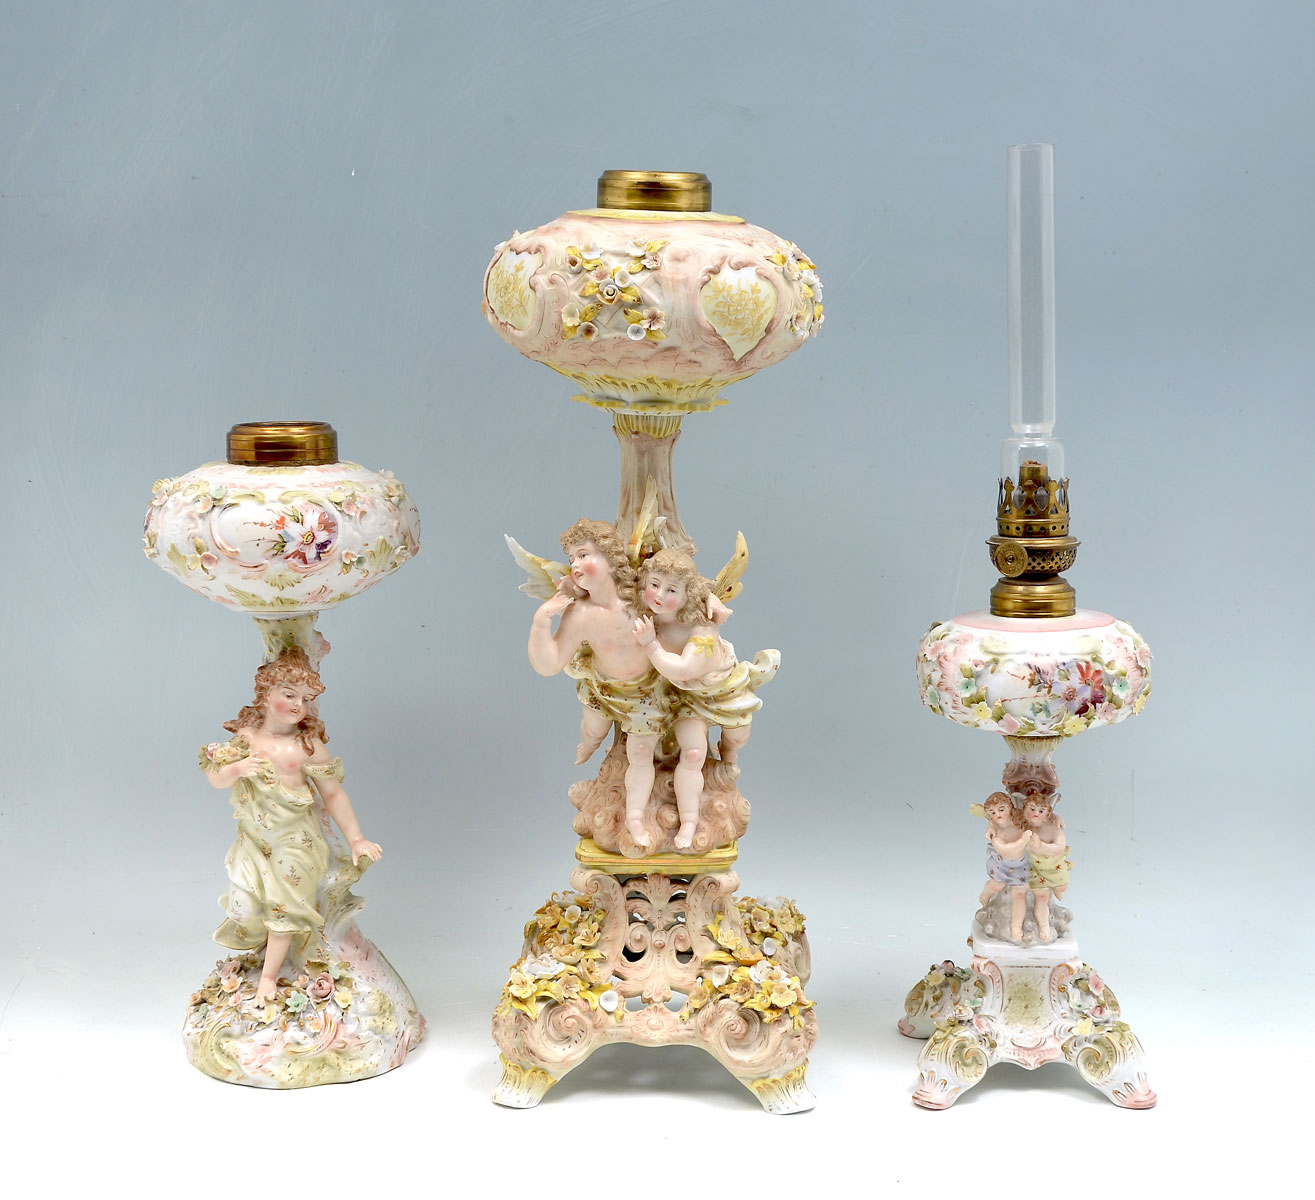 3 DRESDEN STYLE FIGURAL OIL LAMPS  36d29b